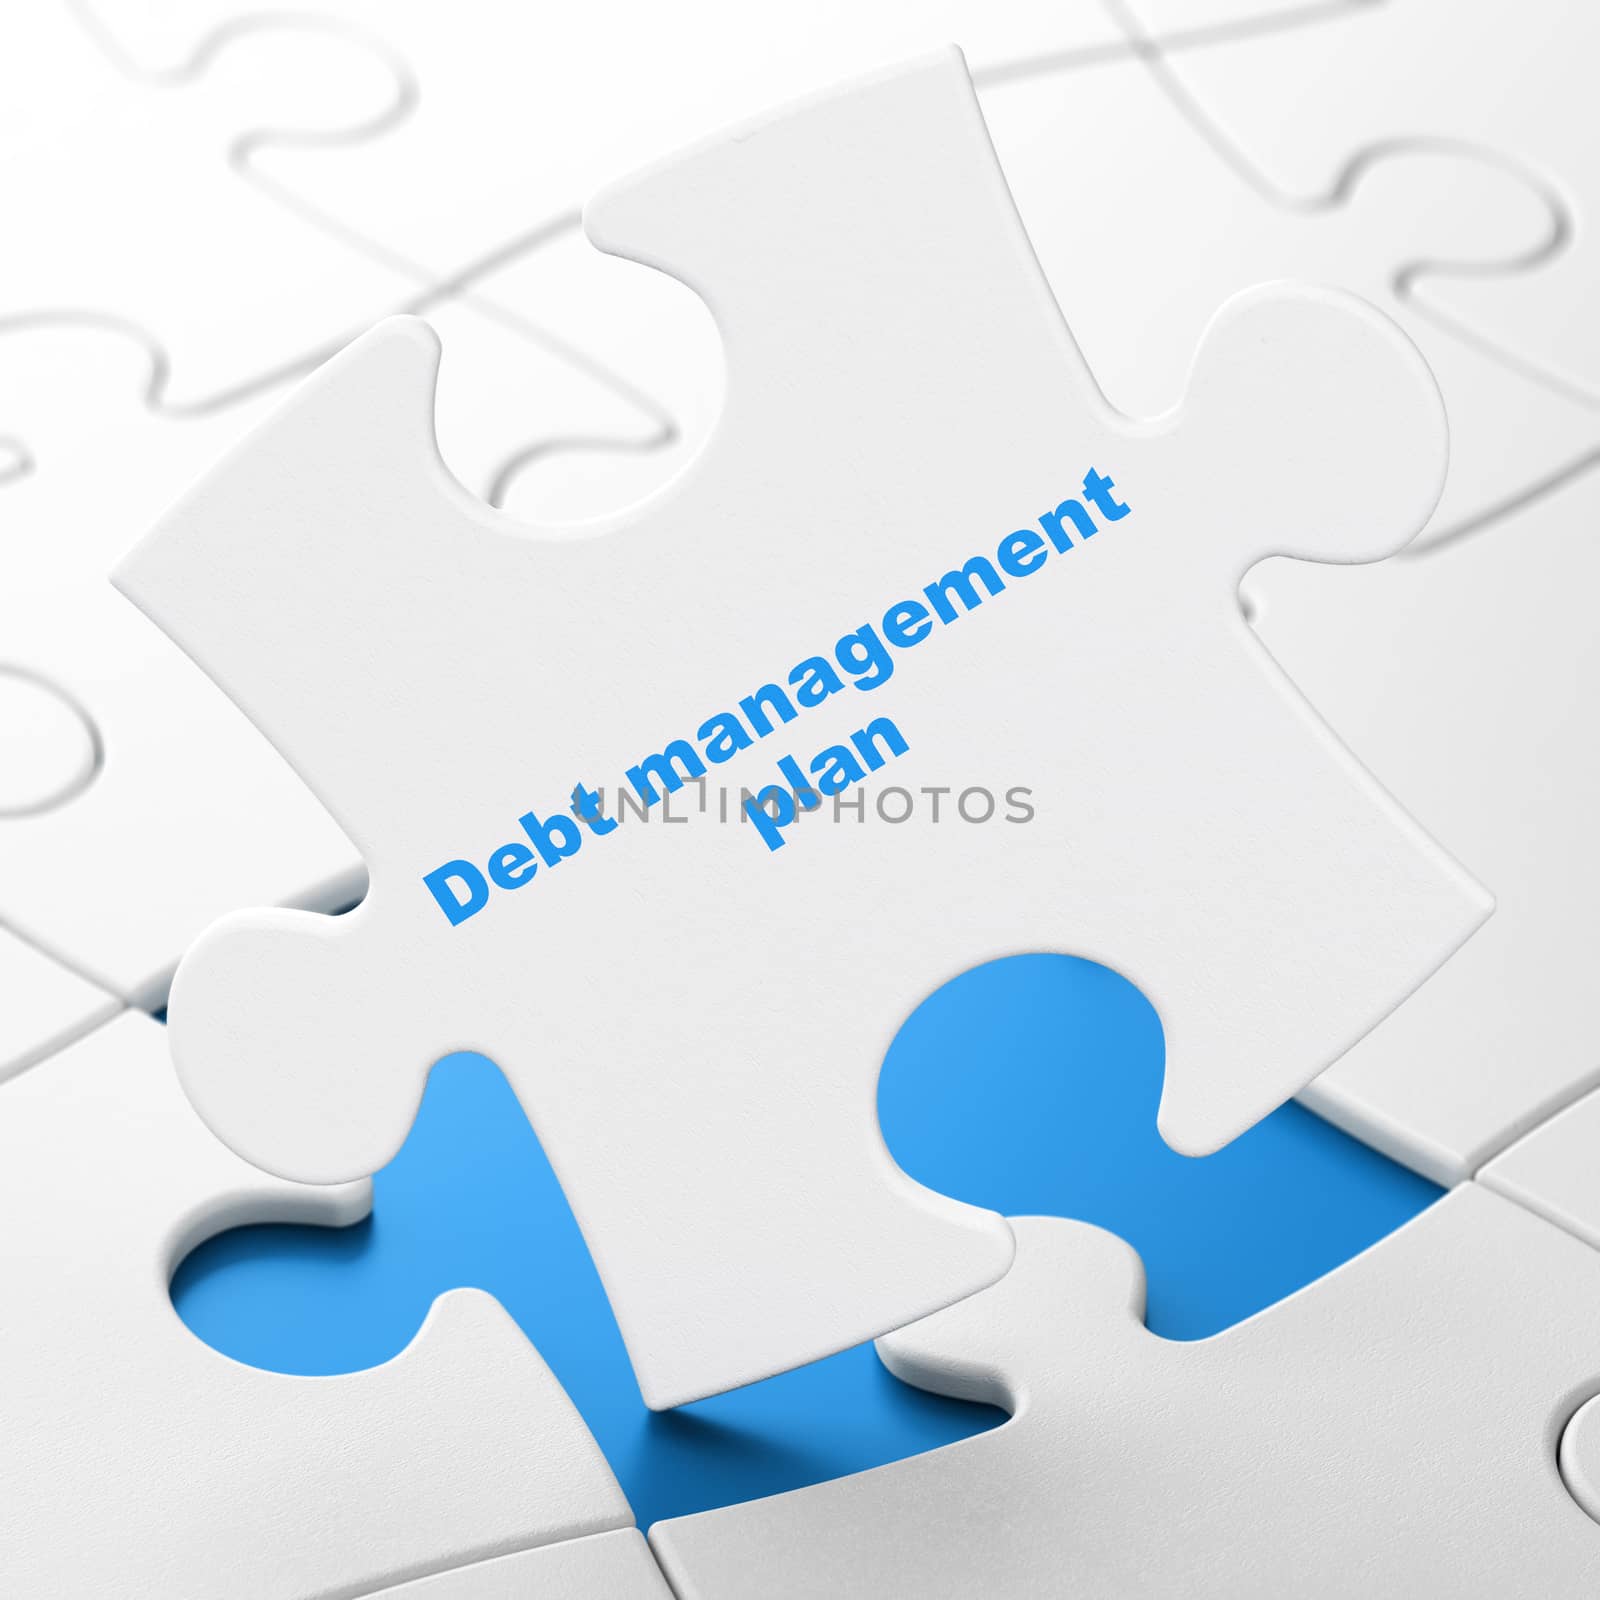 Business concept: Debt Management Plan on puzzle background by maxkabakov